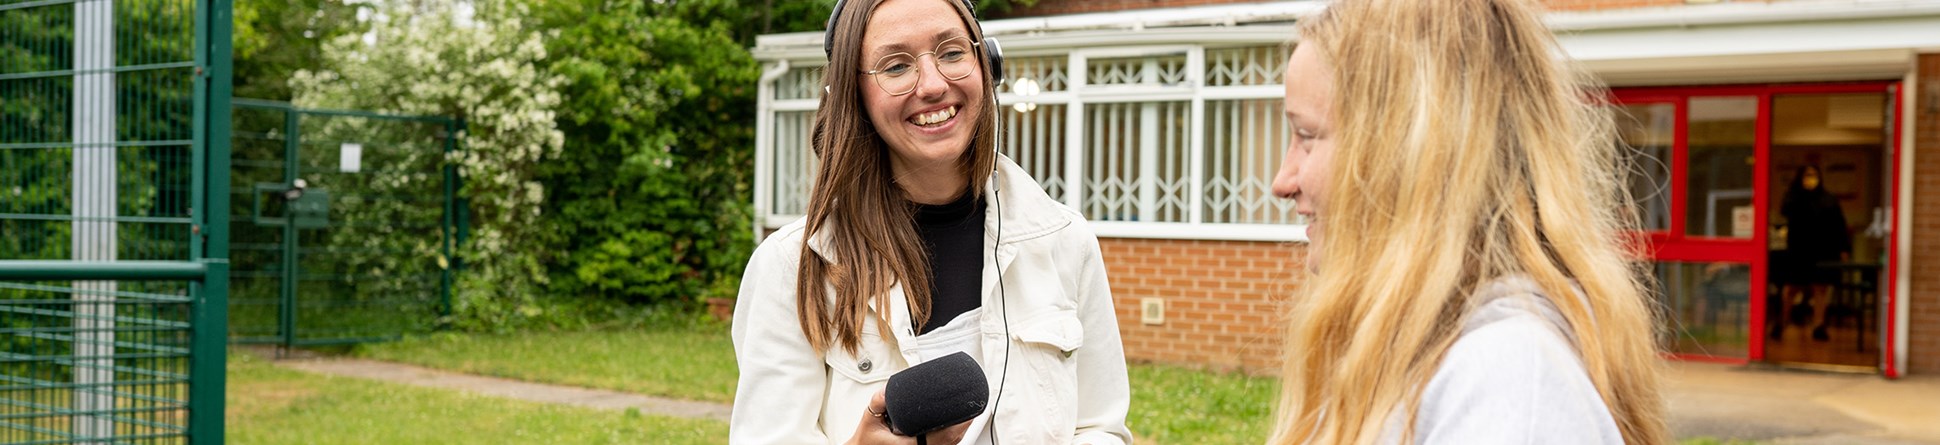 A person with long hair and round glasses dressed in white trousers and jacket holding a microphone and wearing headphones smiles at a person with long blonde hear wearing a grey sweatshirt outside a single storey brick building and grassy area.